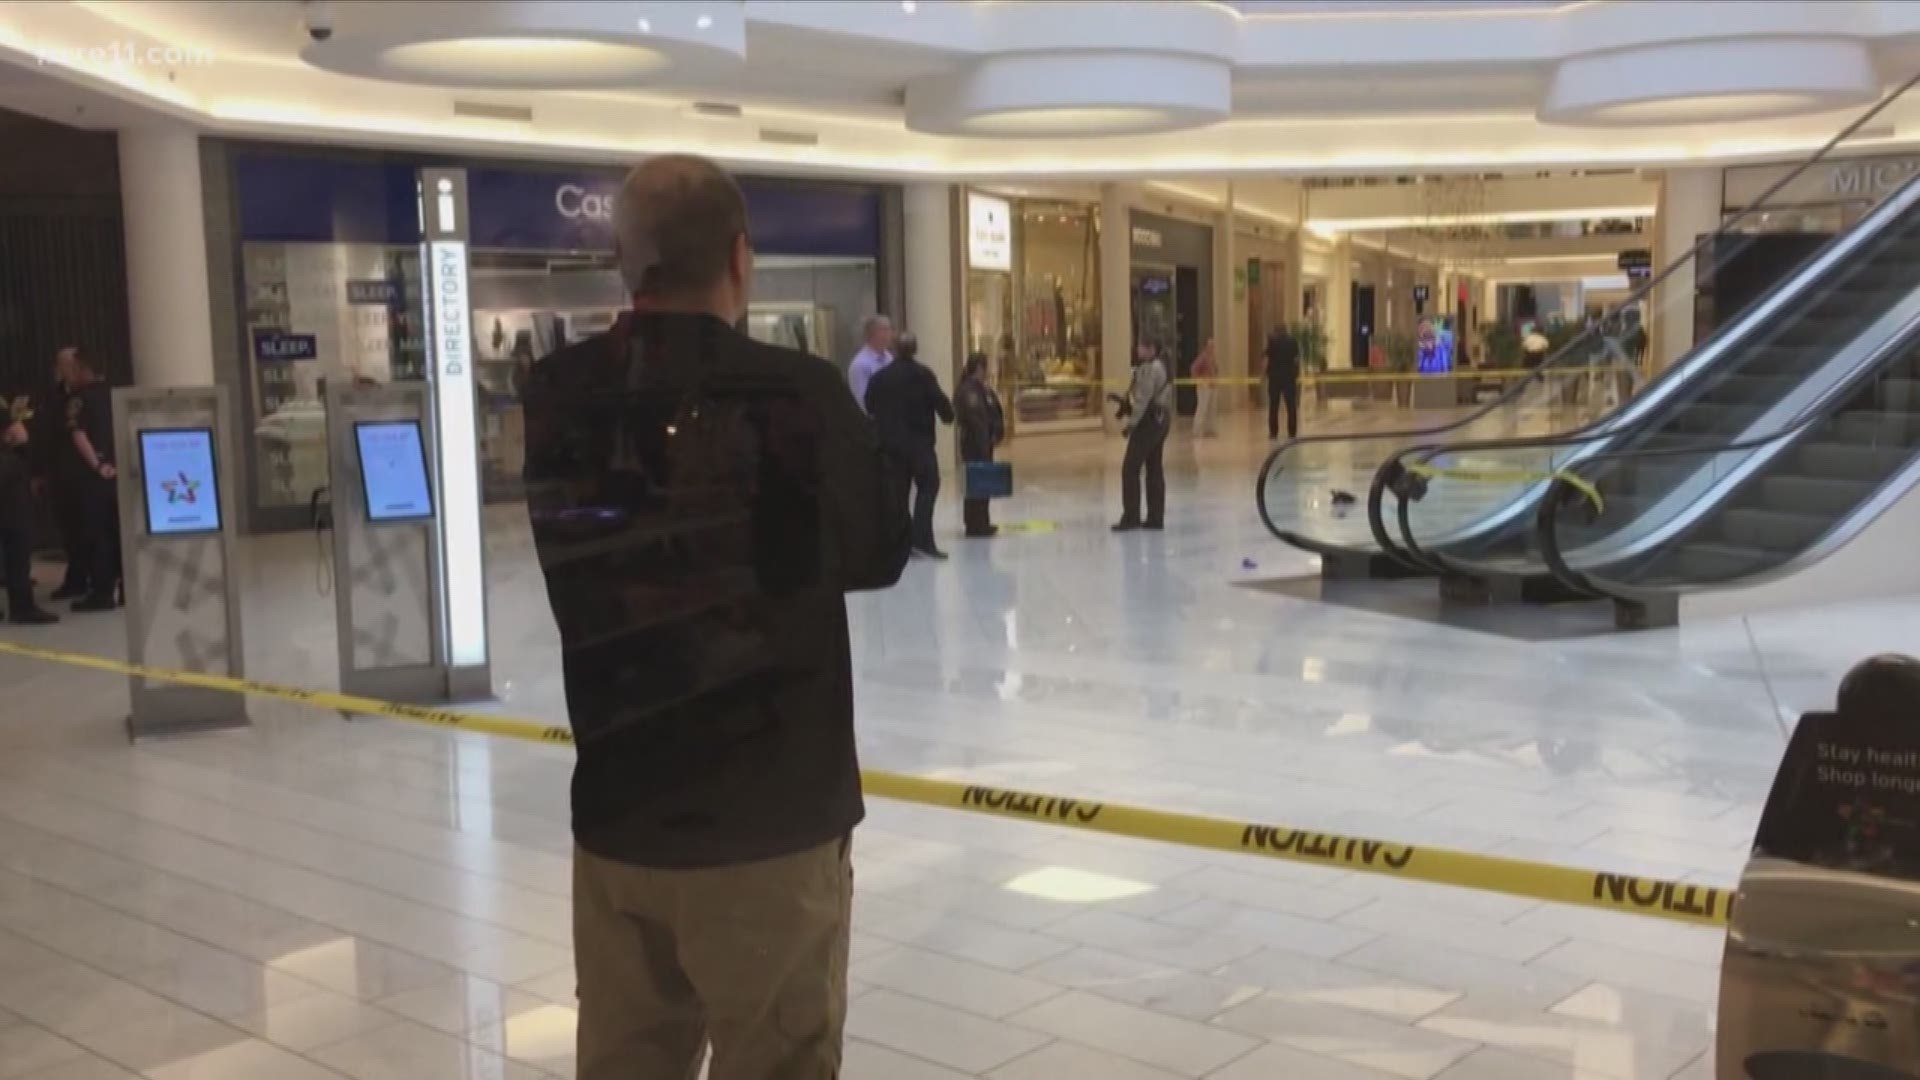 An attorney for the family of a boy police say was thrown from the third floor at the Mall of America says the child is still in critical condition.